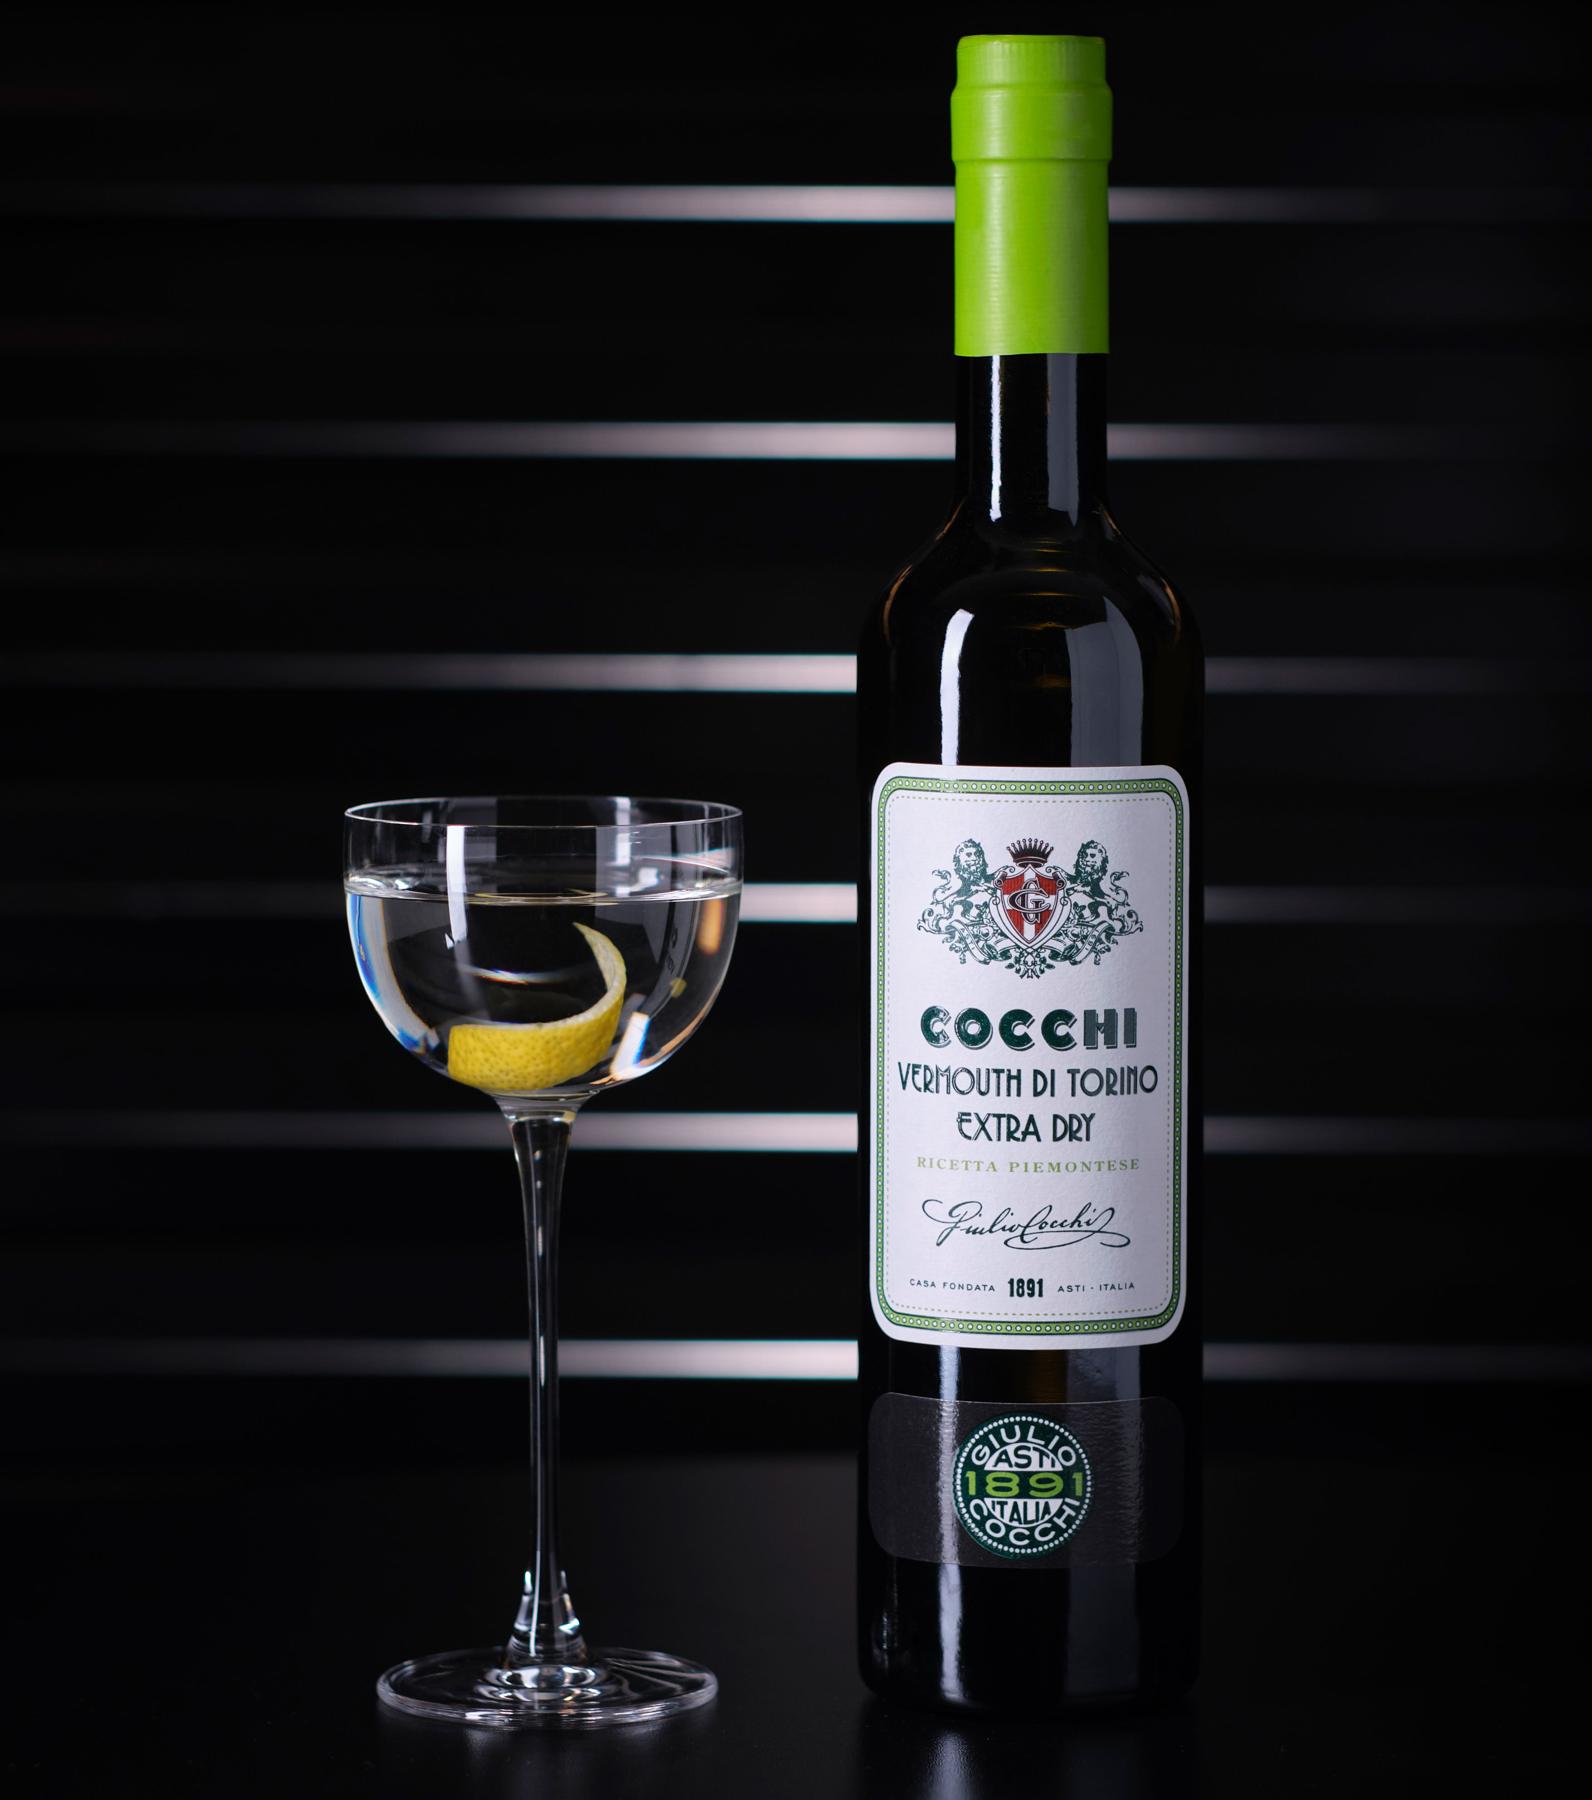 An example of the 50/50 Royal Martini, the mixed drink (drink) featuring Hayman’s Royal Dock Navy Strength Gin, Cocchi Vermouth di Torino Extra Dry, and lemon twist; photo by Cocchi